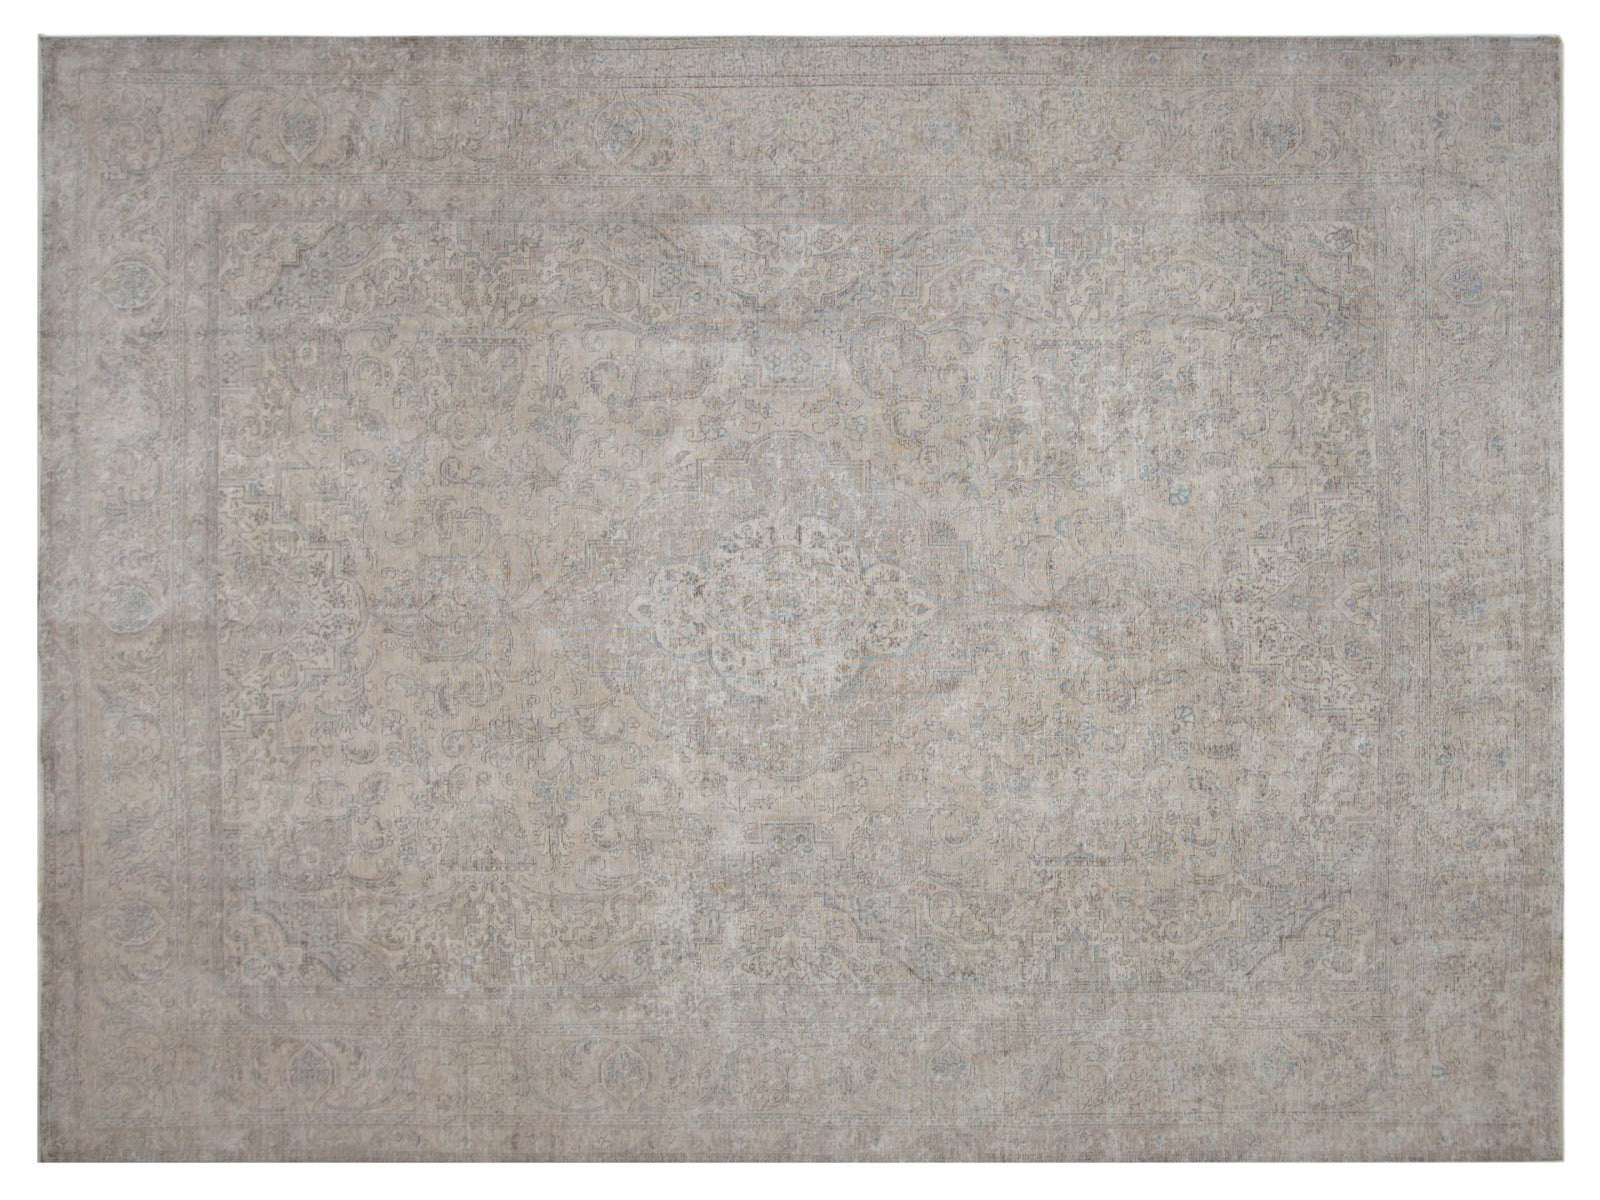 Oversize vintage Persian rug with a faded medallion design and subtle motifs, embodying over 80 years of history.